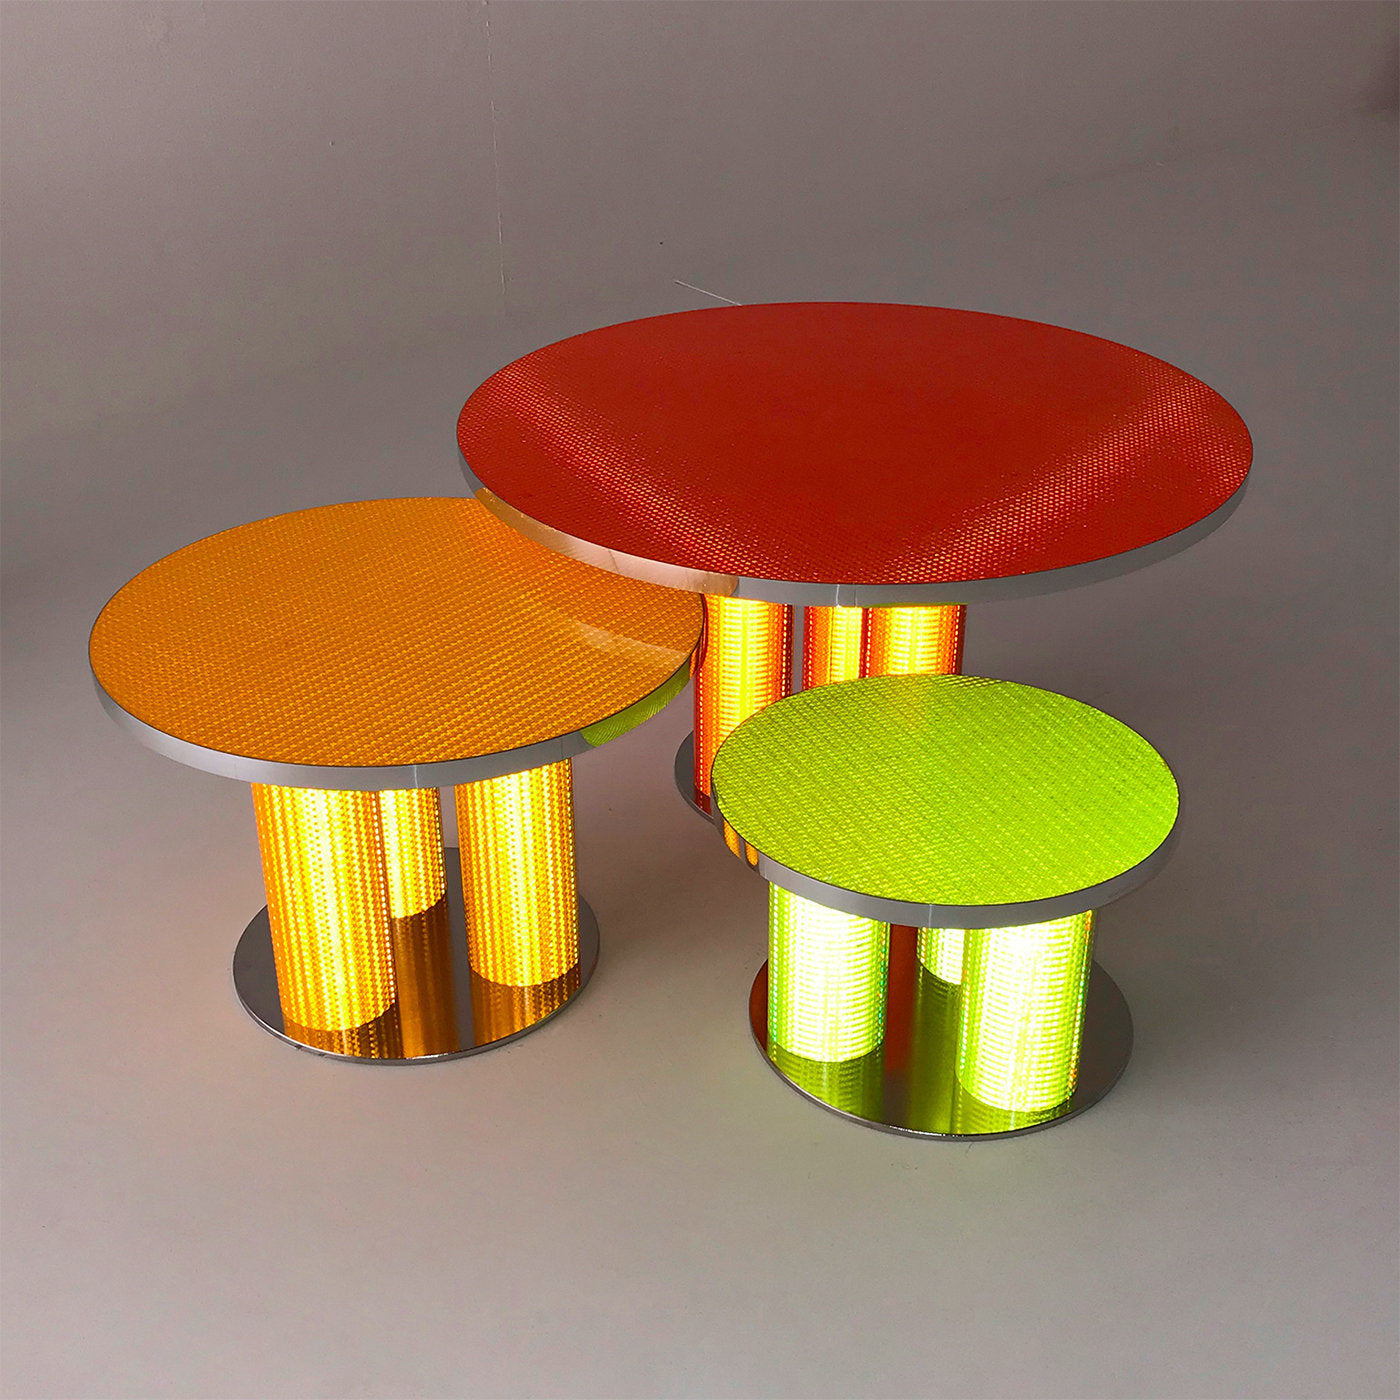 Reflective Collection - Orange round coffee table - Alternative view 1